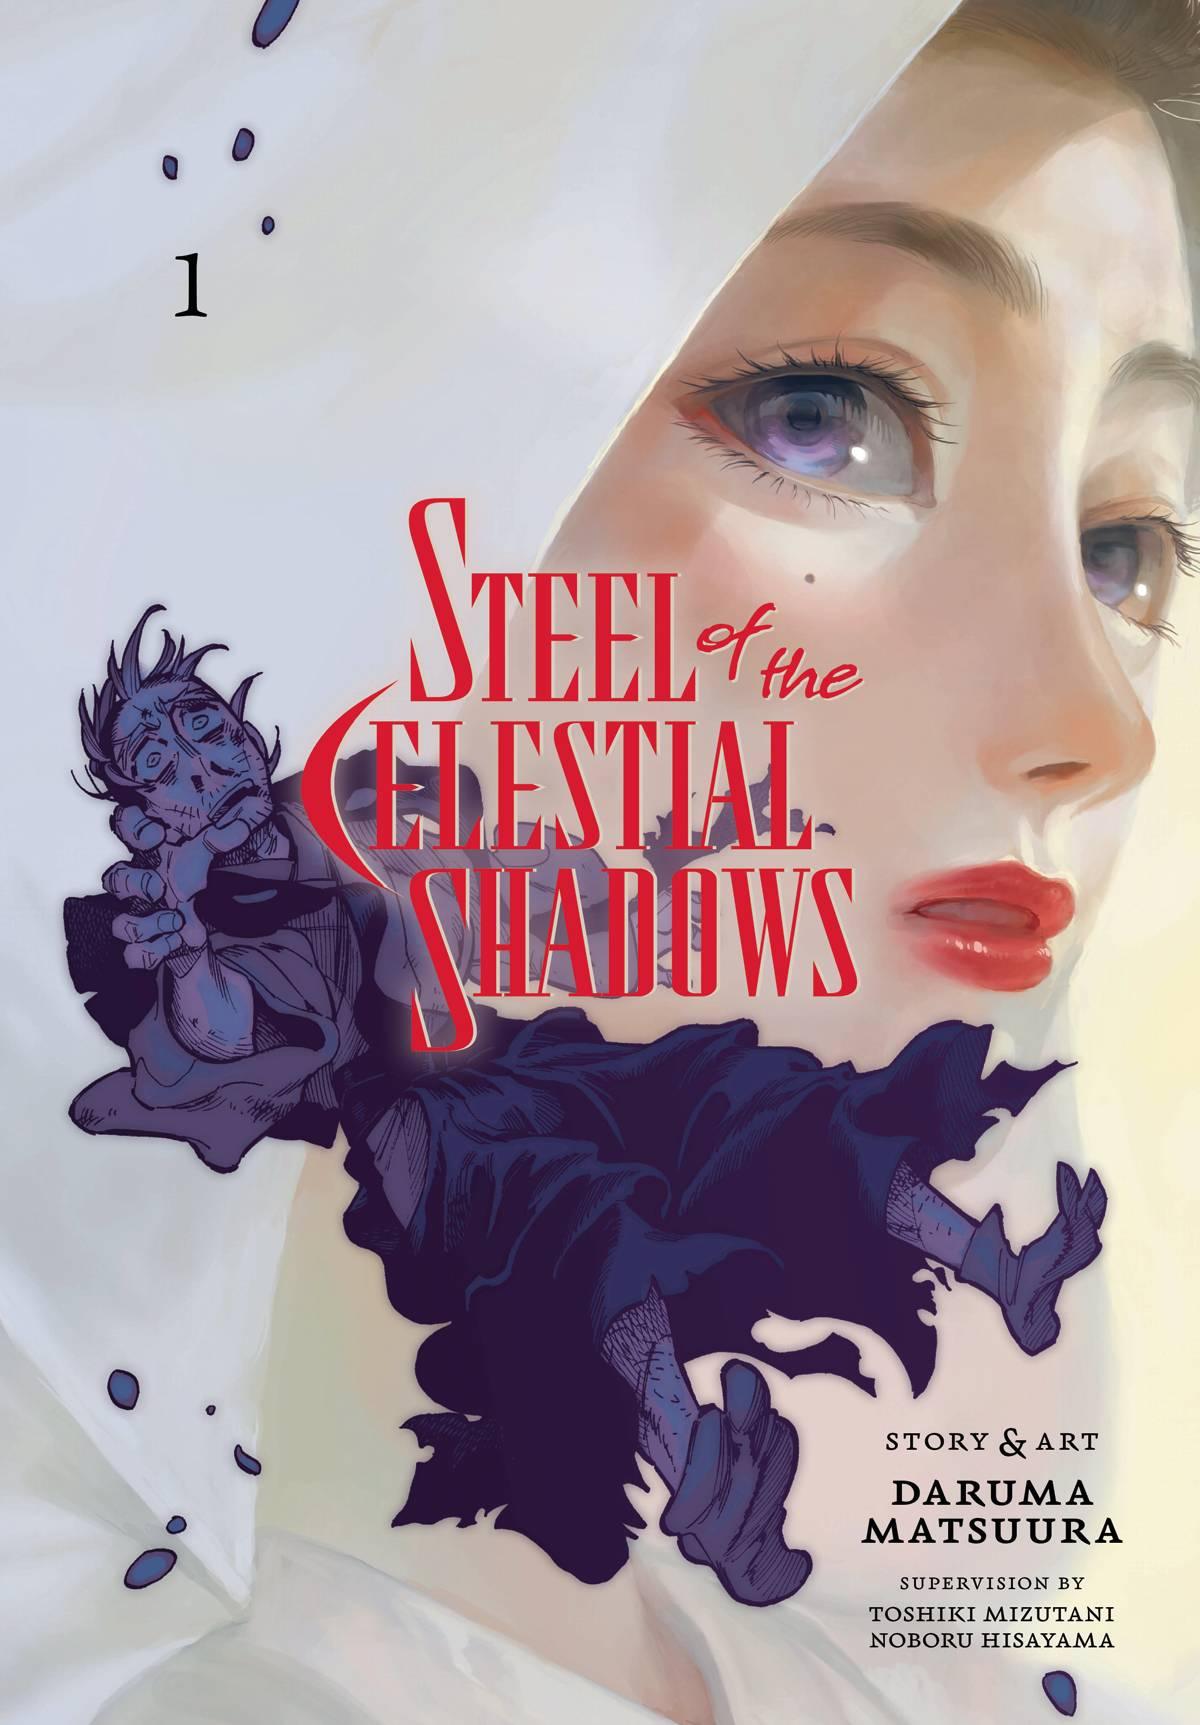 STEEL OF THE CELESTIAL SHADOWS GN VOL 01 - Kings Comics